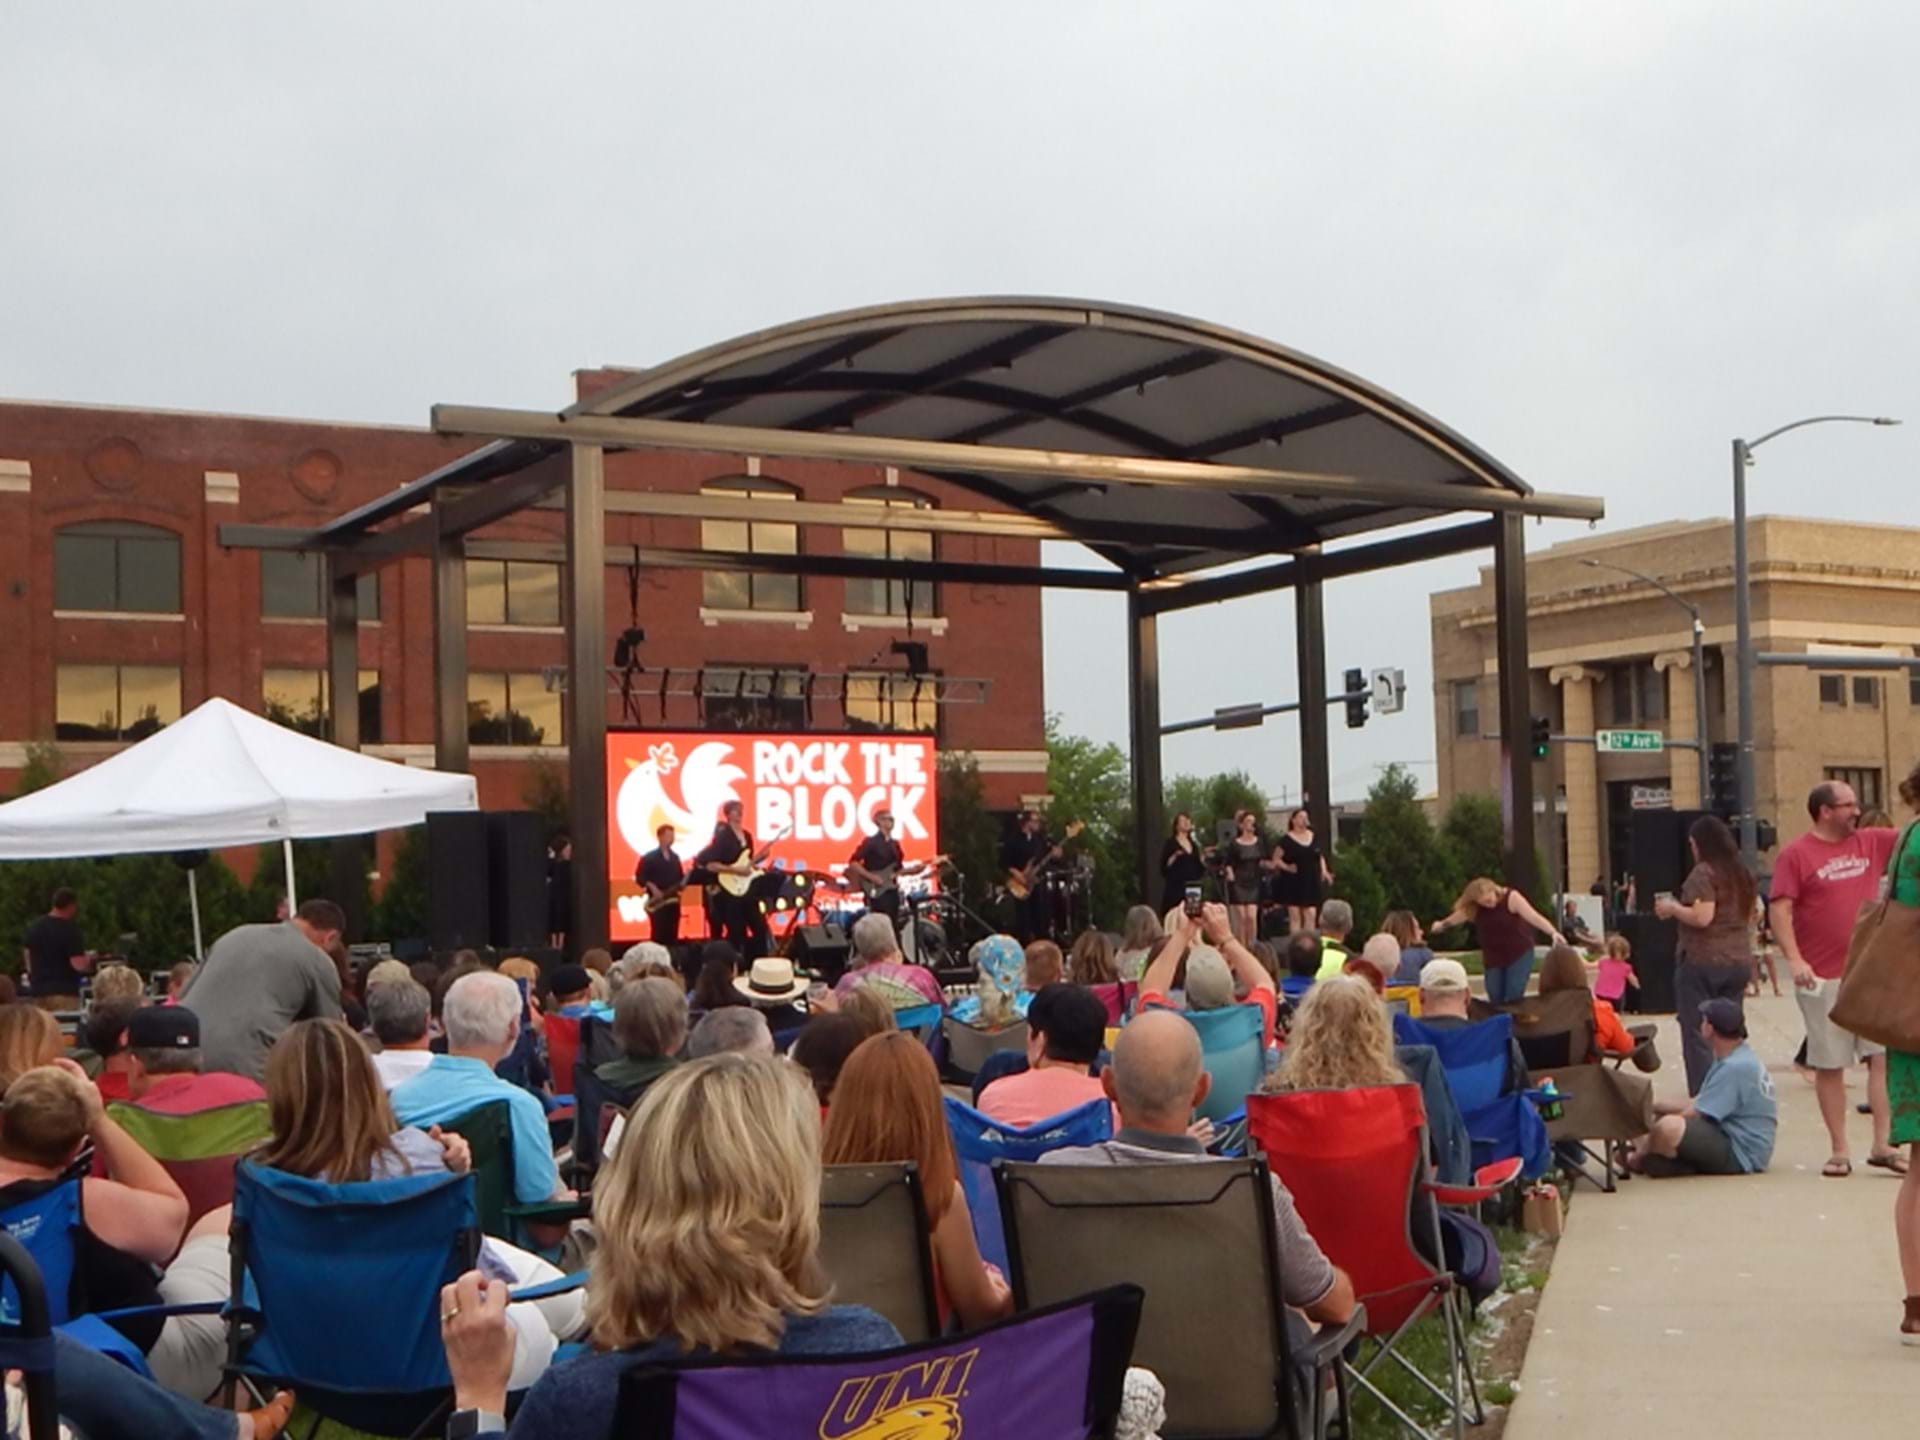 Find FREE live music every Friday in the summer with our Rock the Block program. 